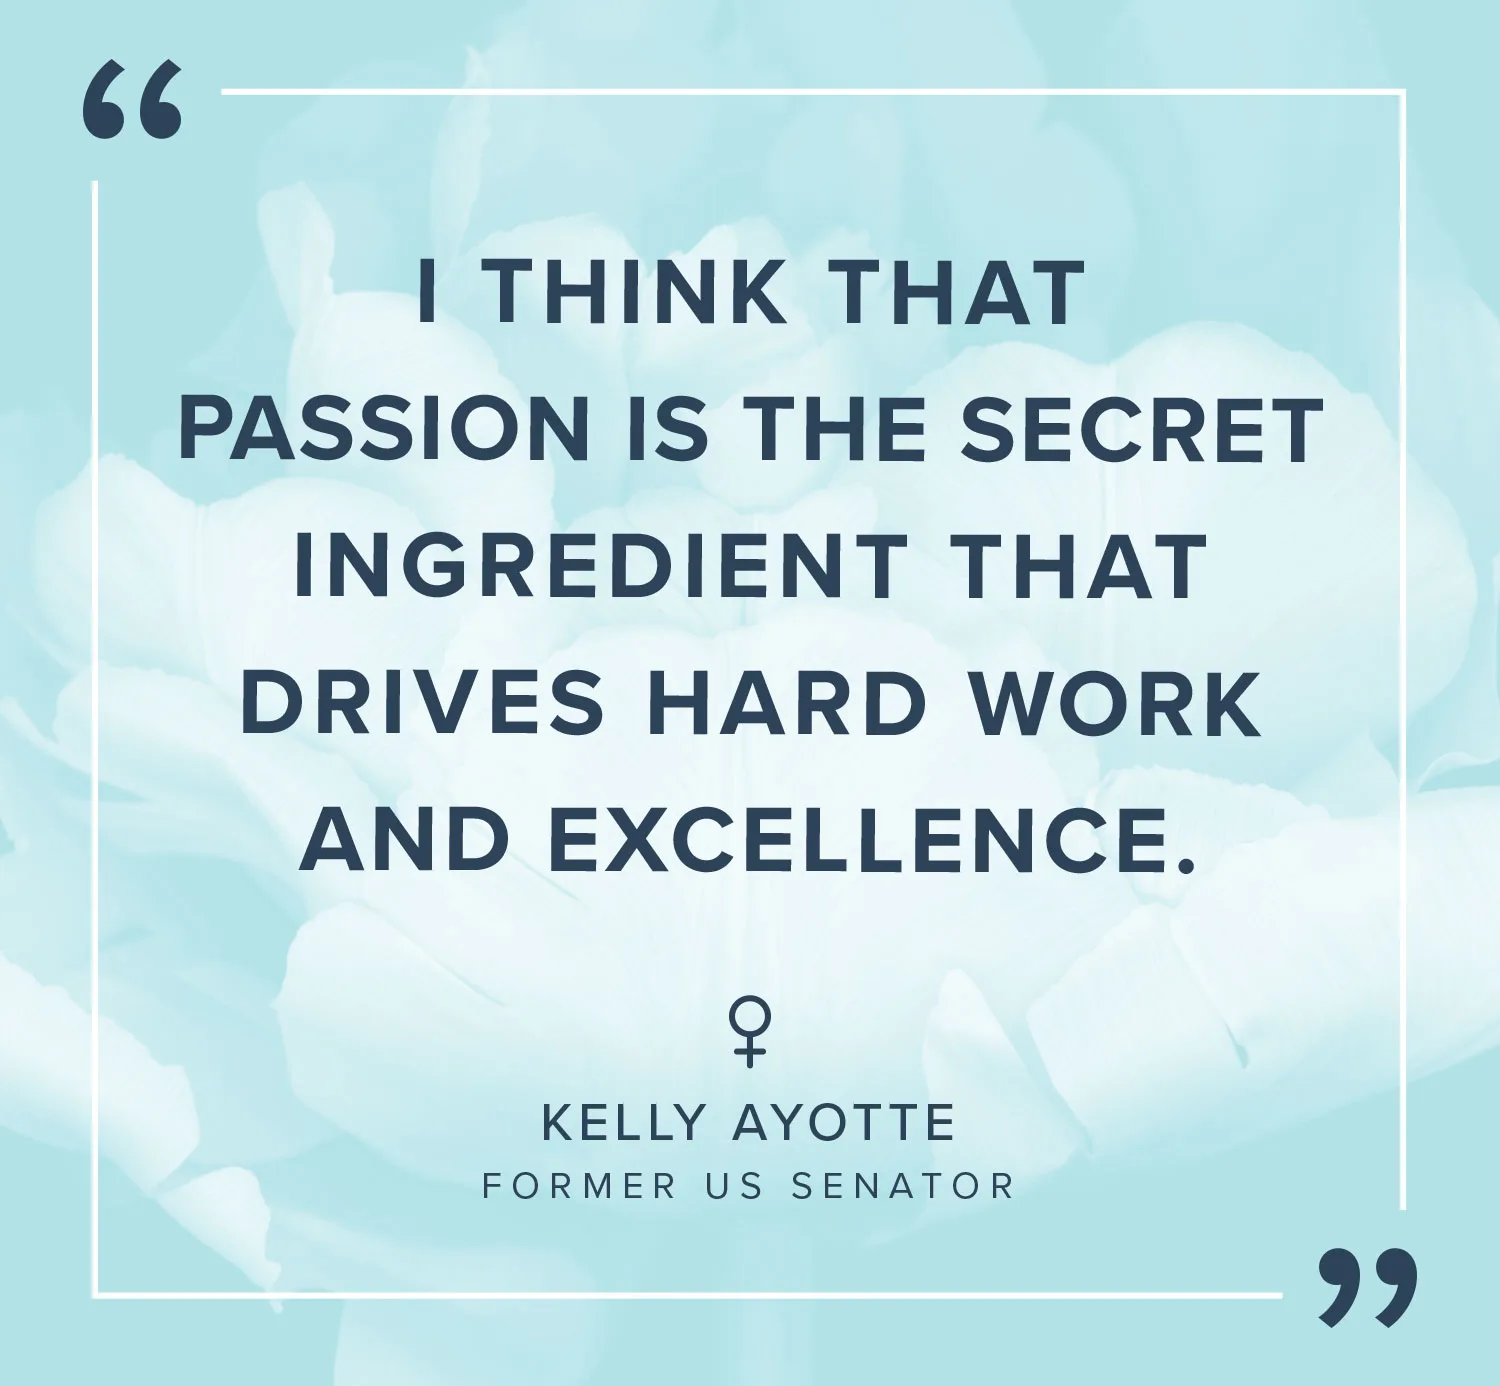 empowering-quotes-ayotte